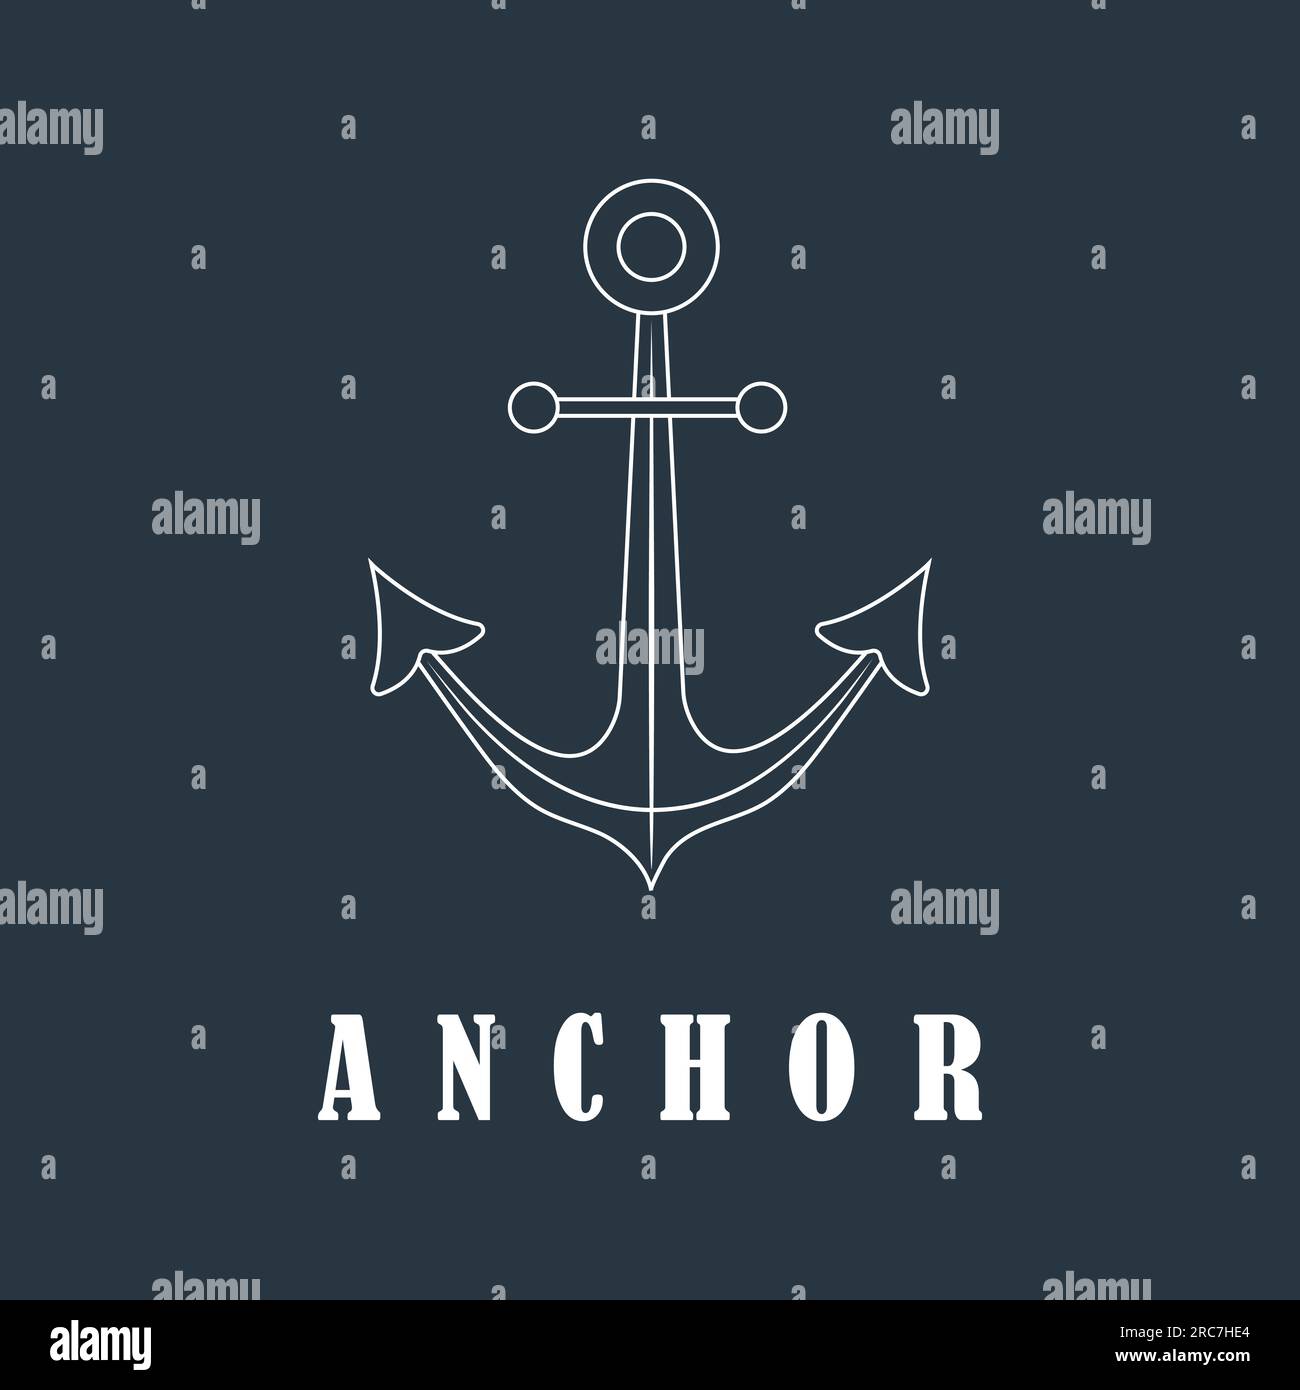 Anchor icon isolated on dark background. Marine logo. Outline vector illustration in flat style Stock Vector